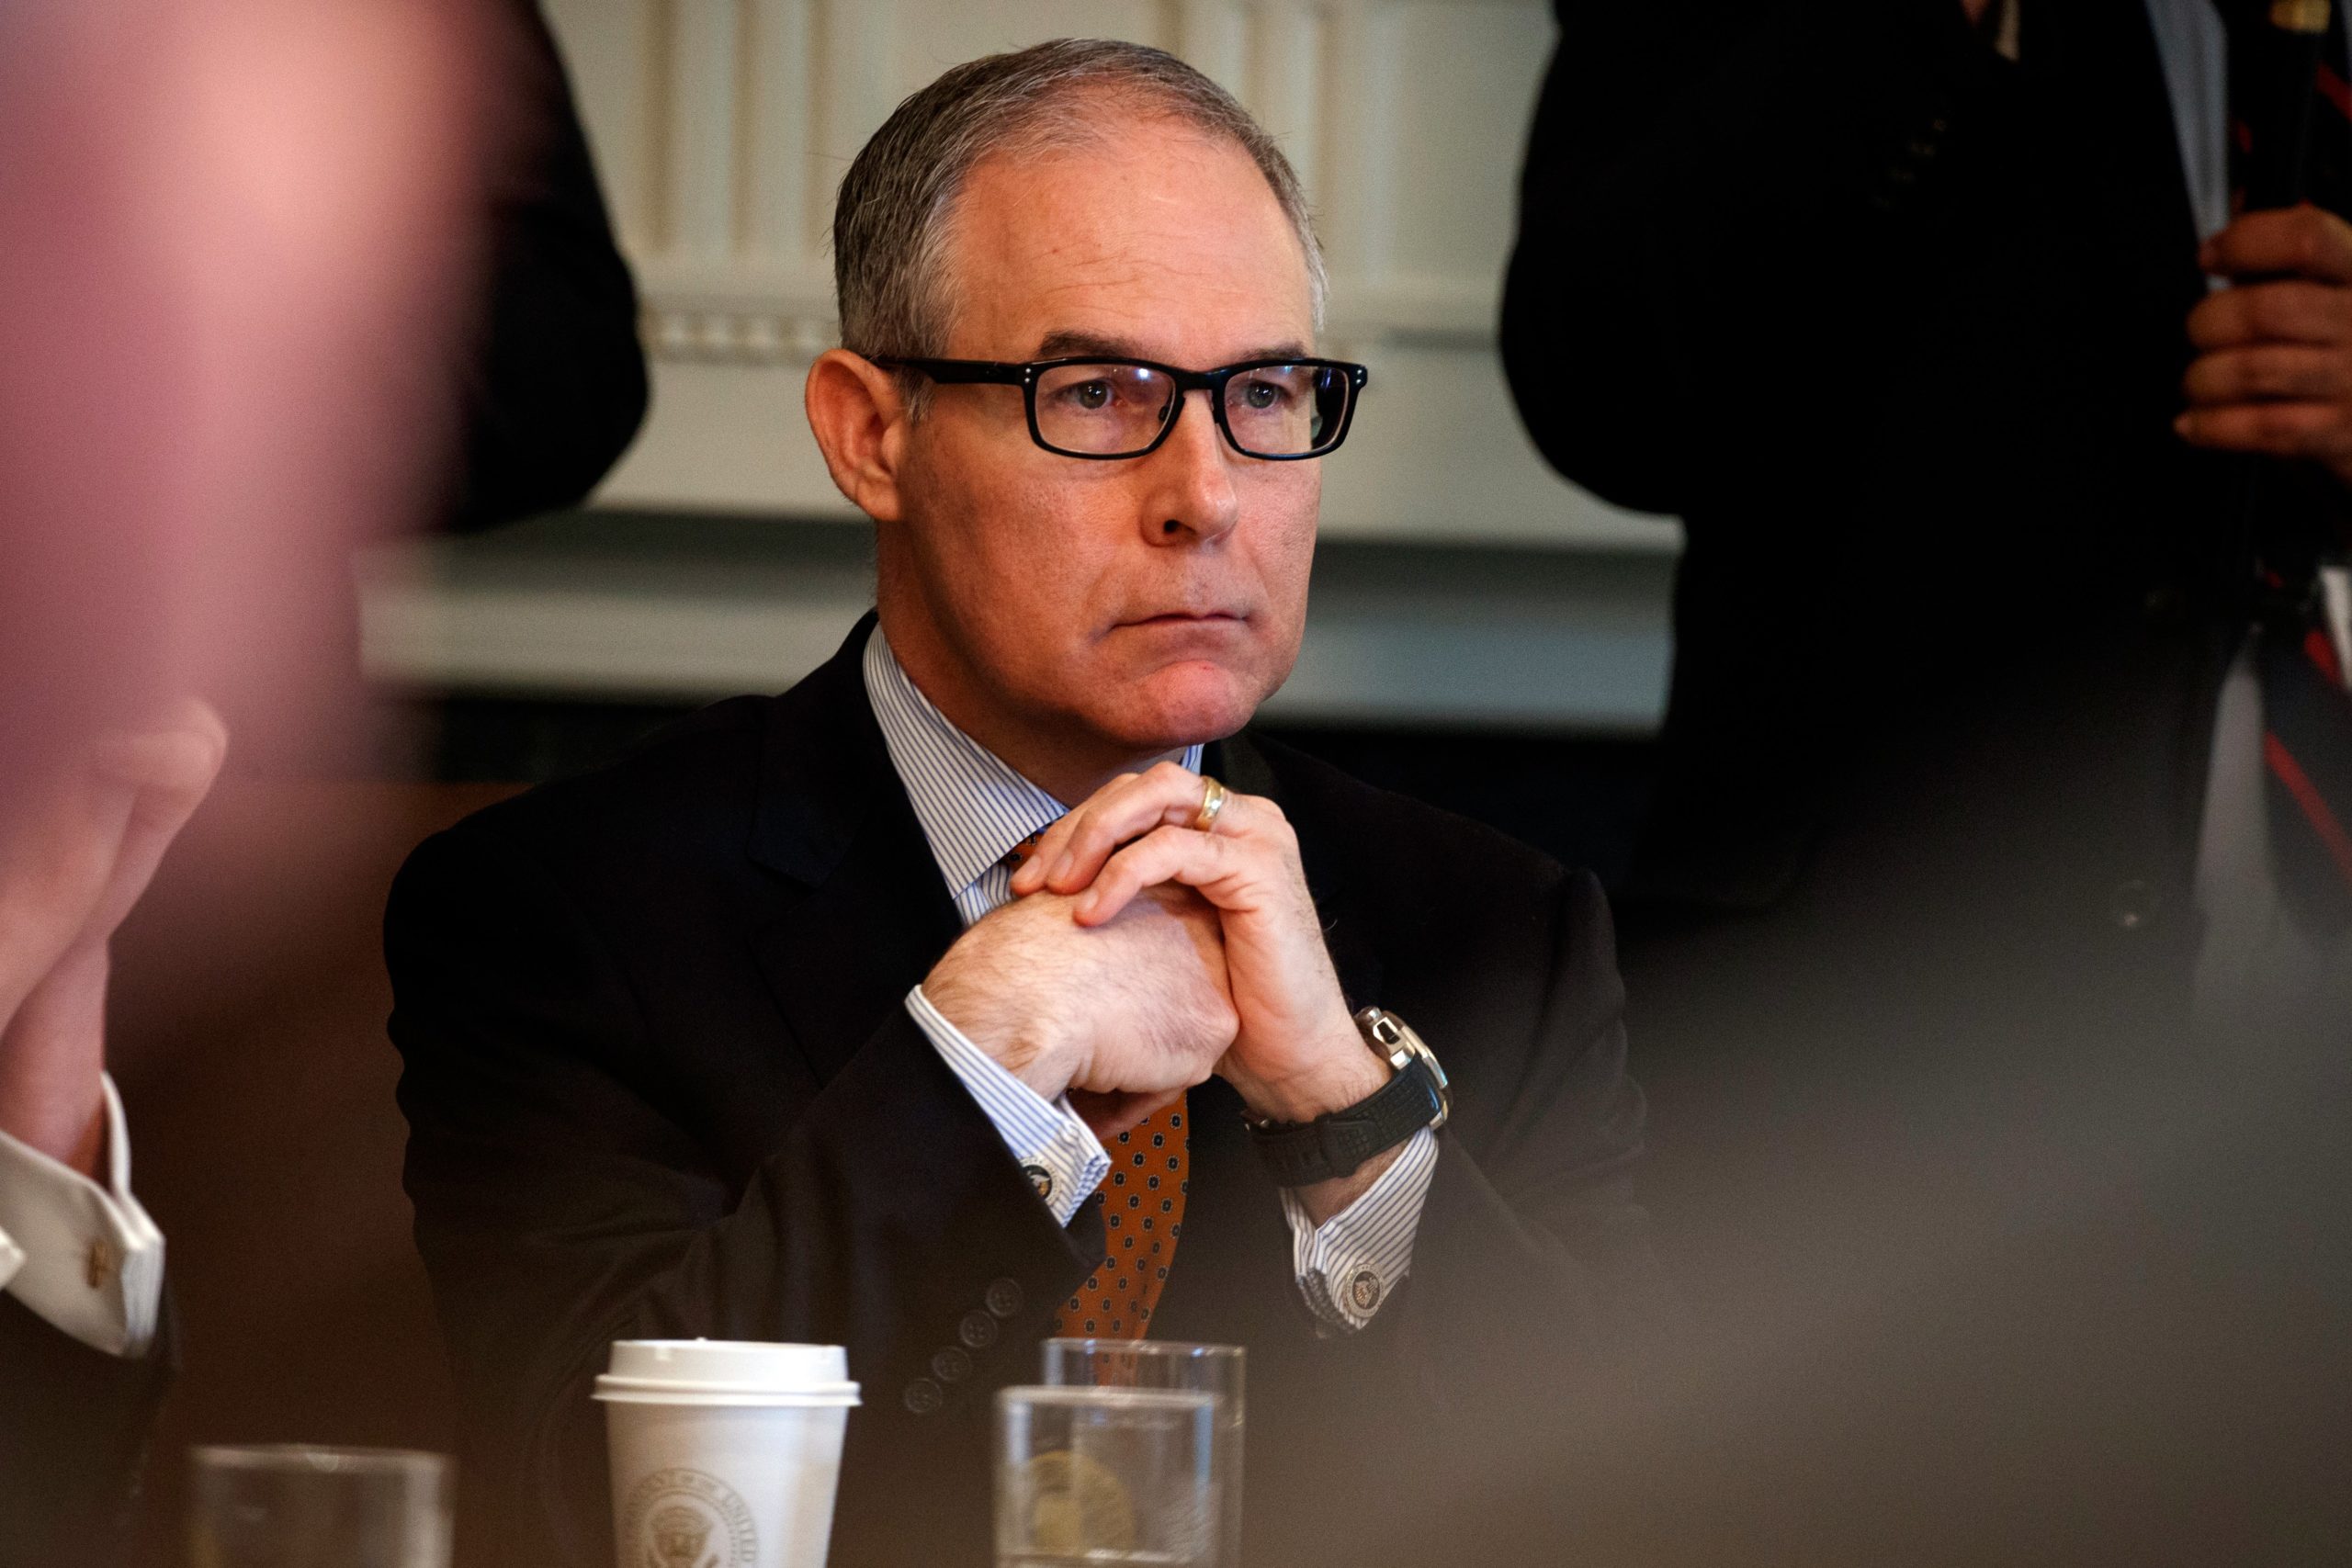 Environmental Protection Agency administrator Scott Pruitt listens as President Donald Trump speaks during a cabinet meeting at the White House in June of 2018. (Photo: Evan Vucci, AP)